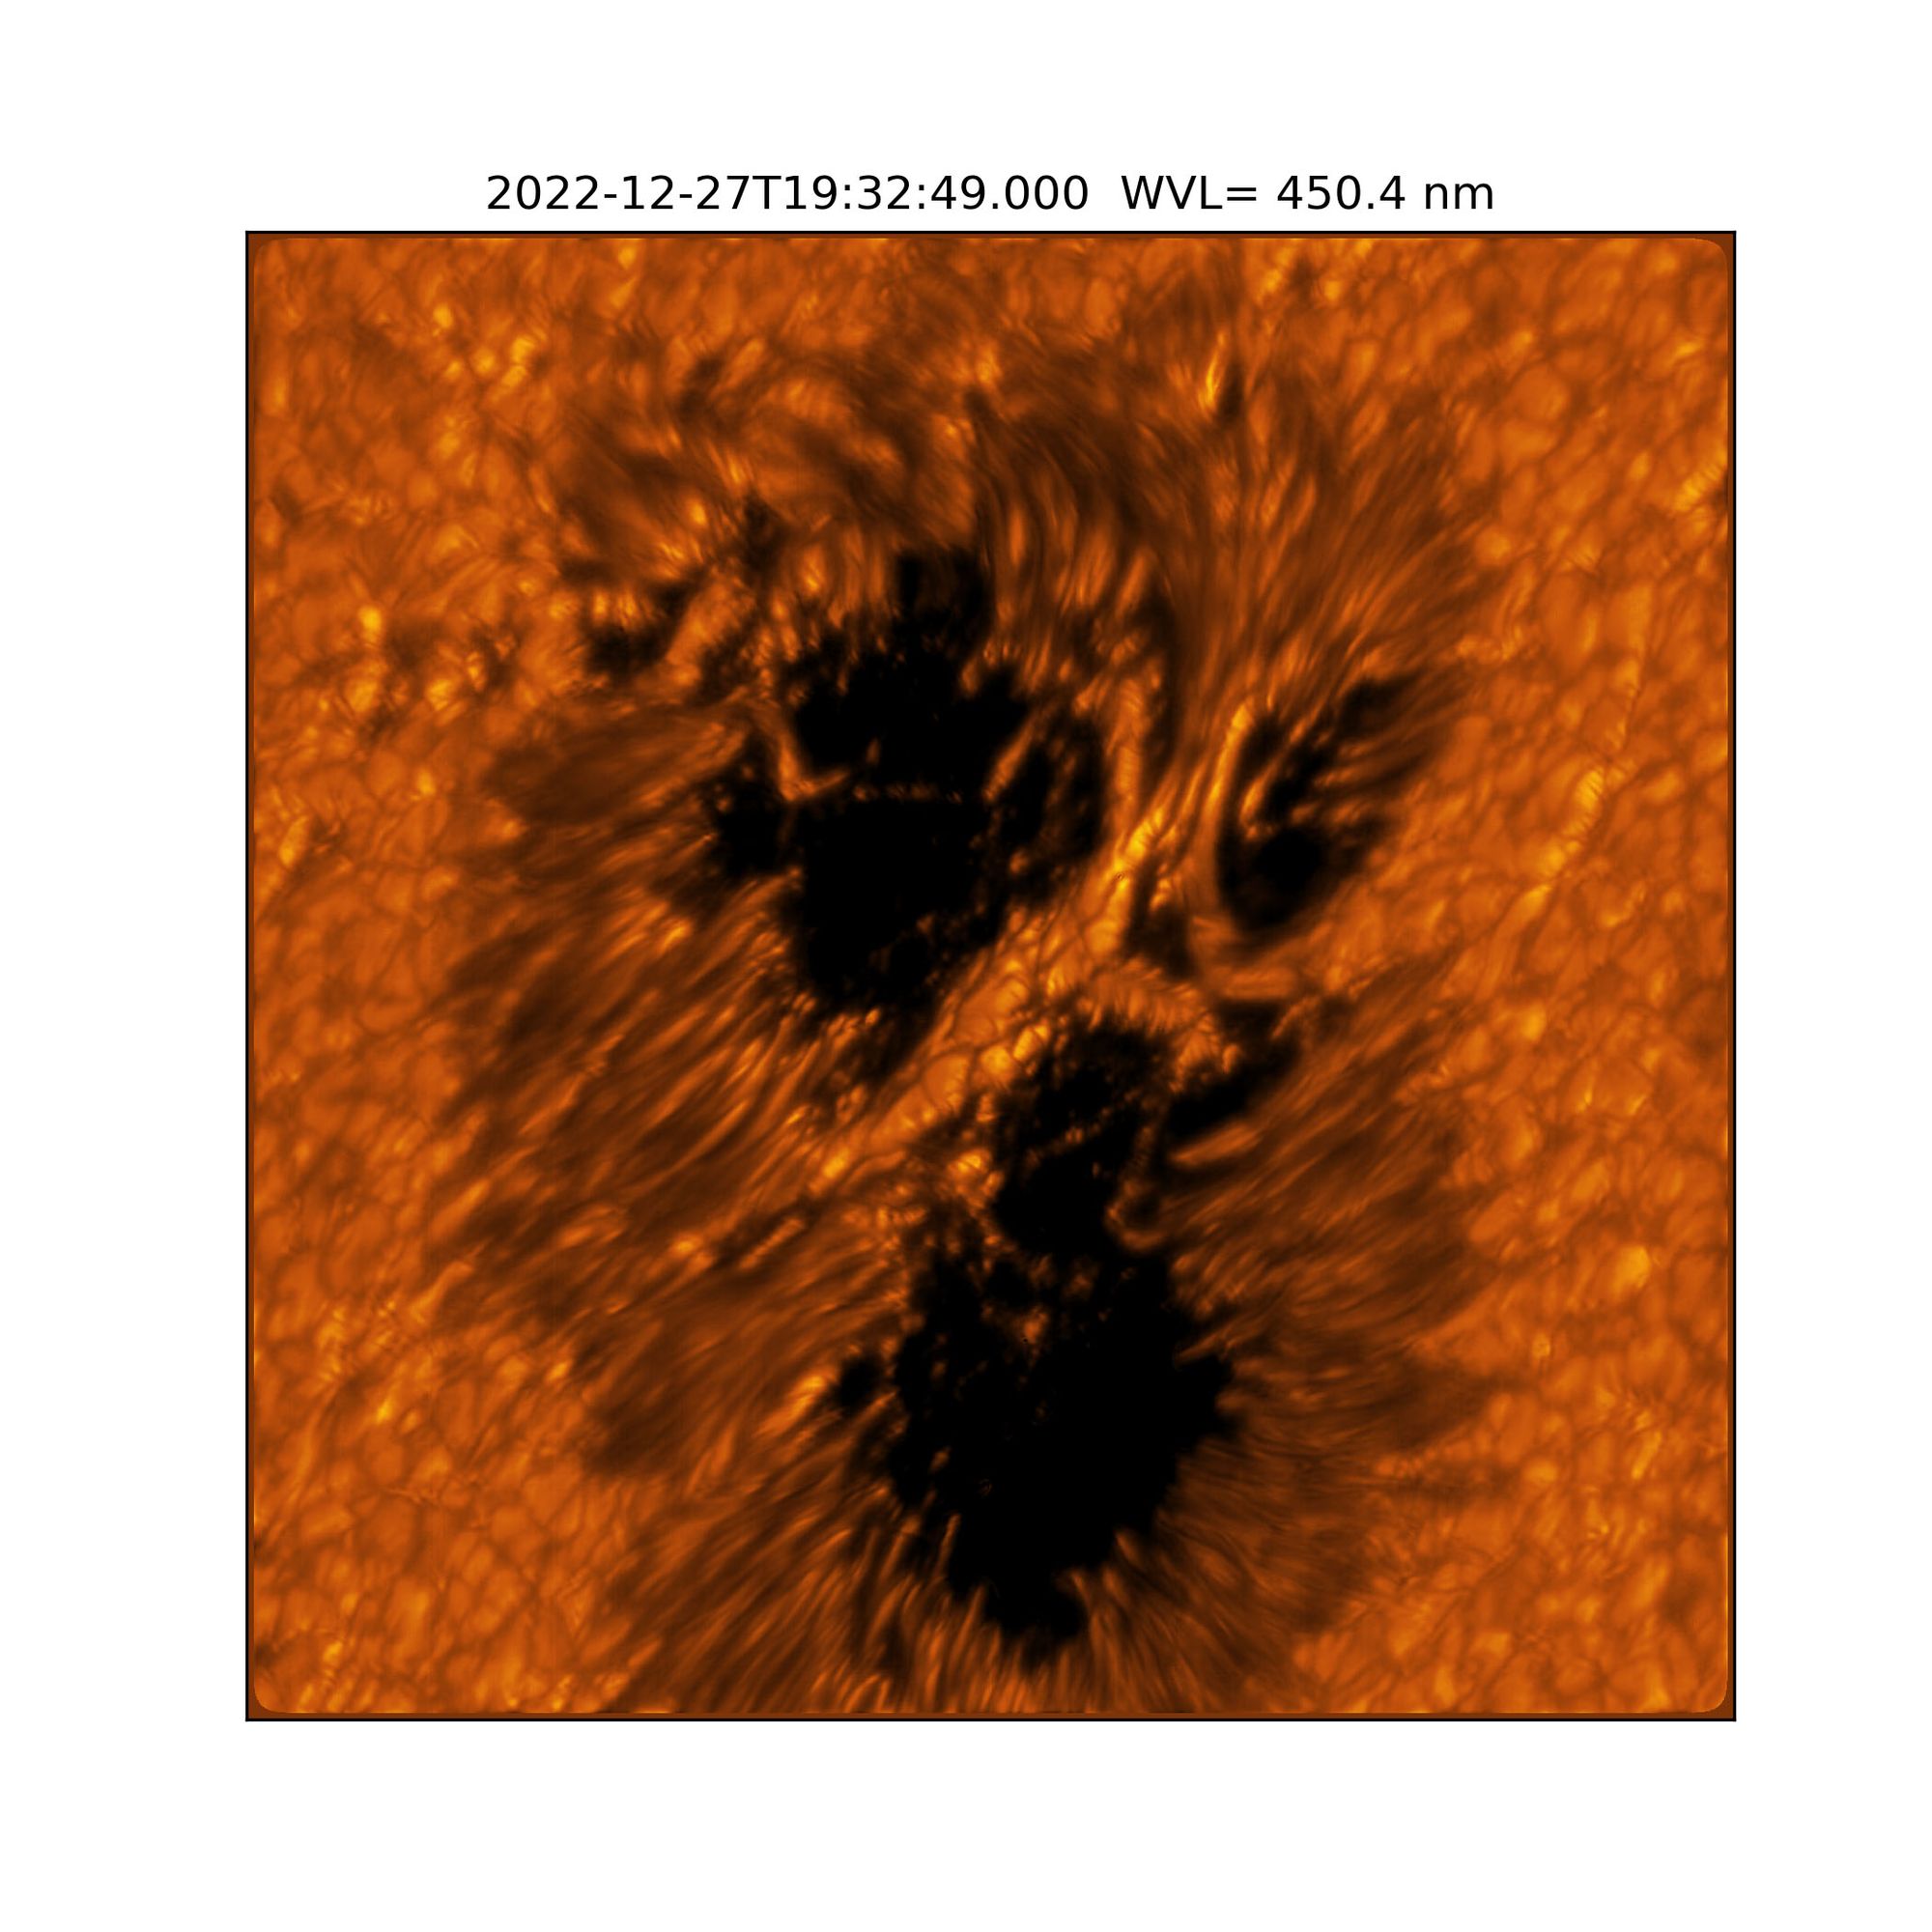 images of the sun